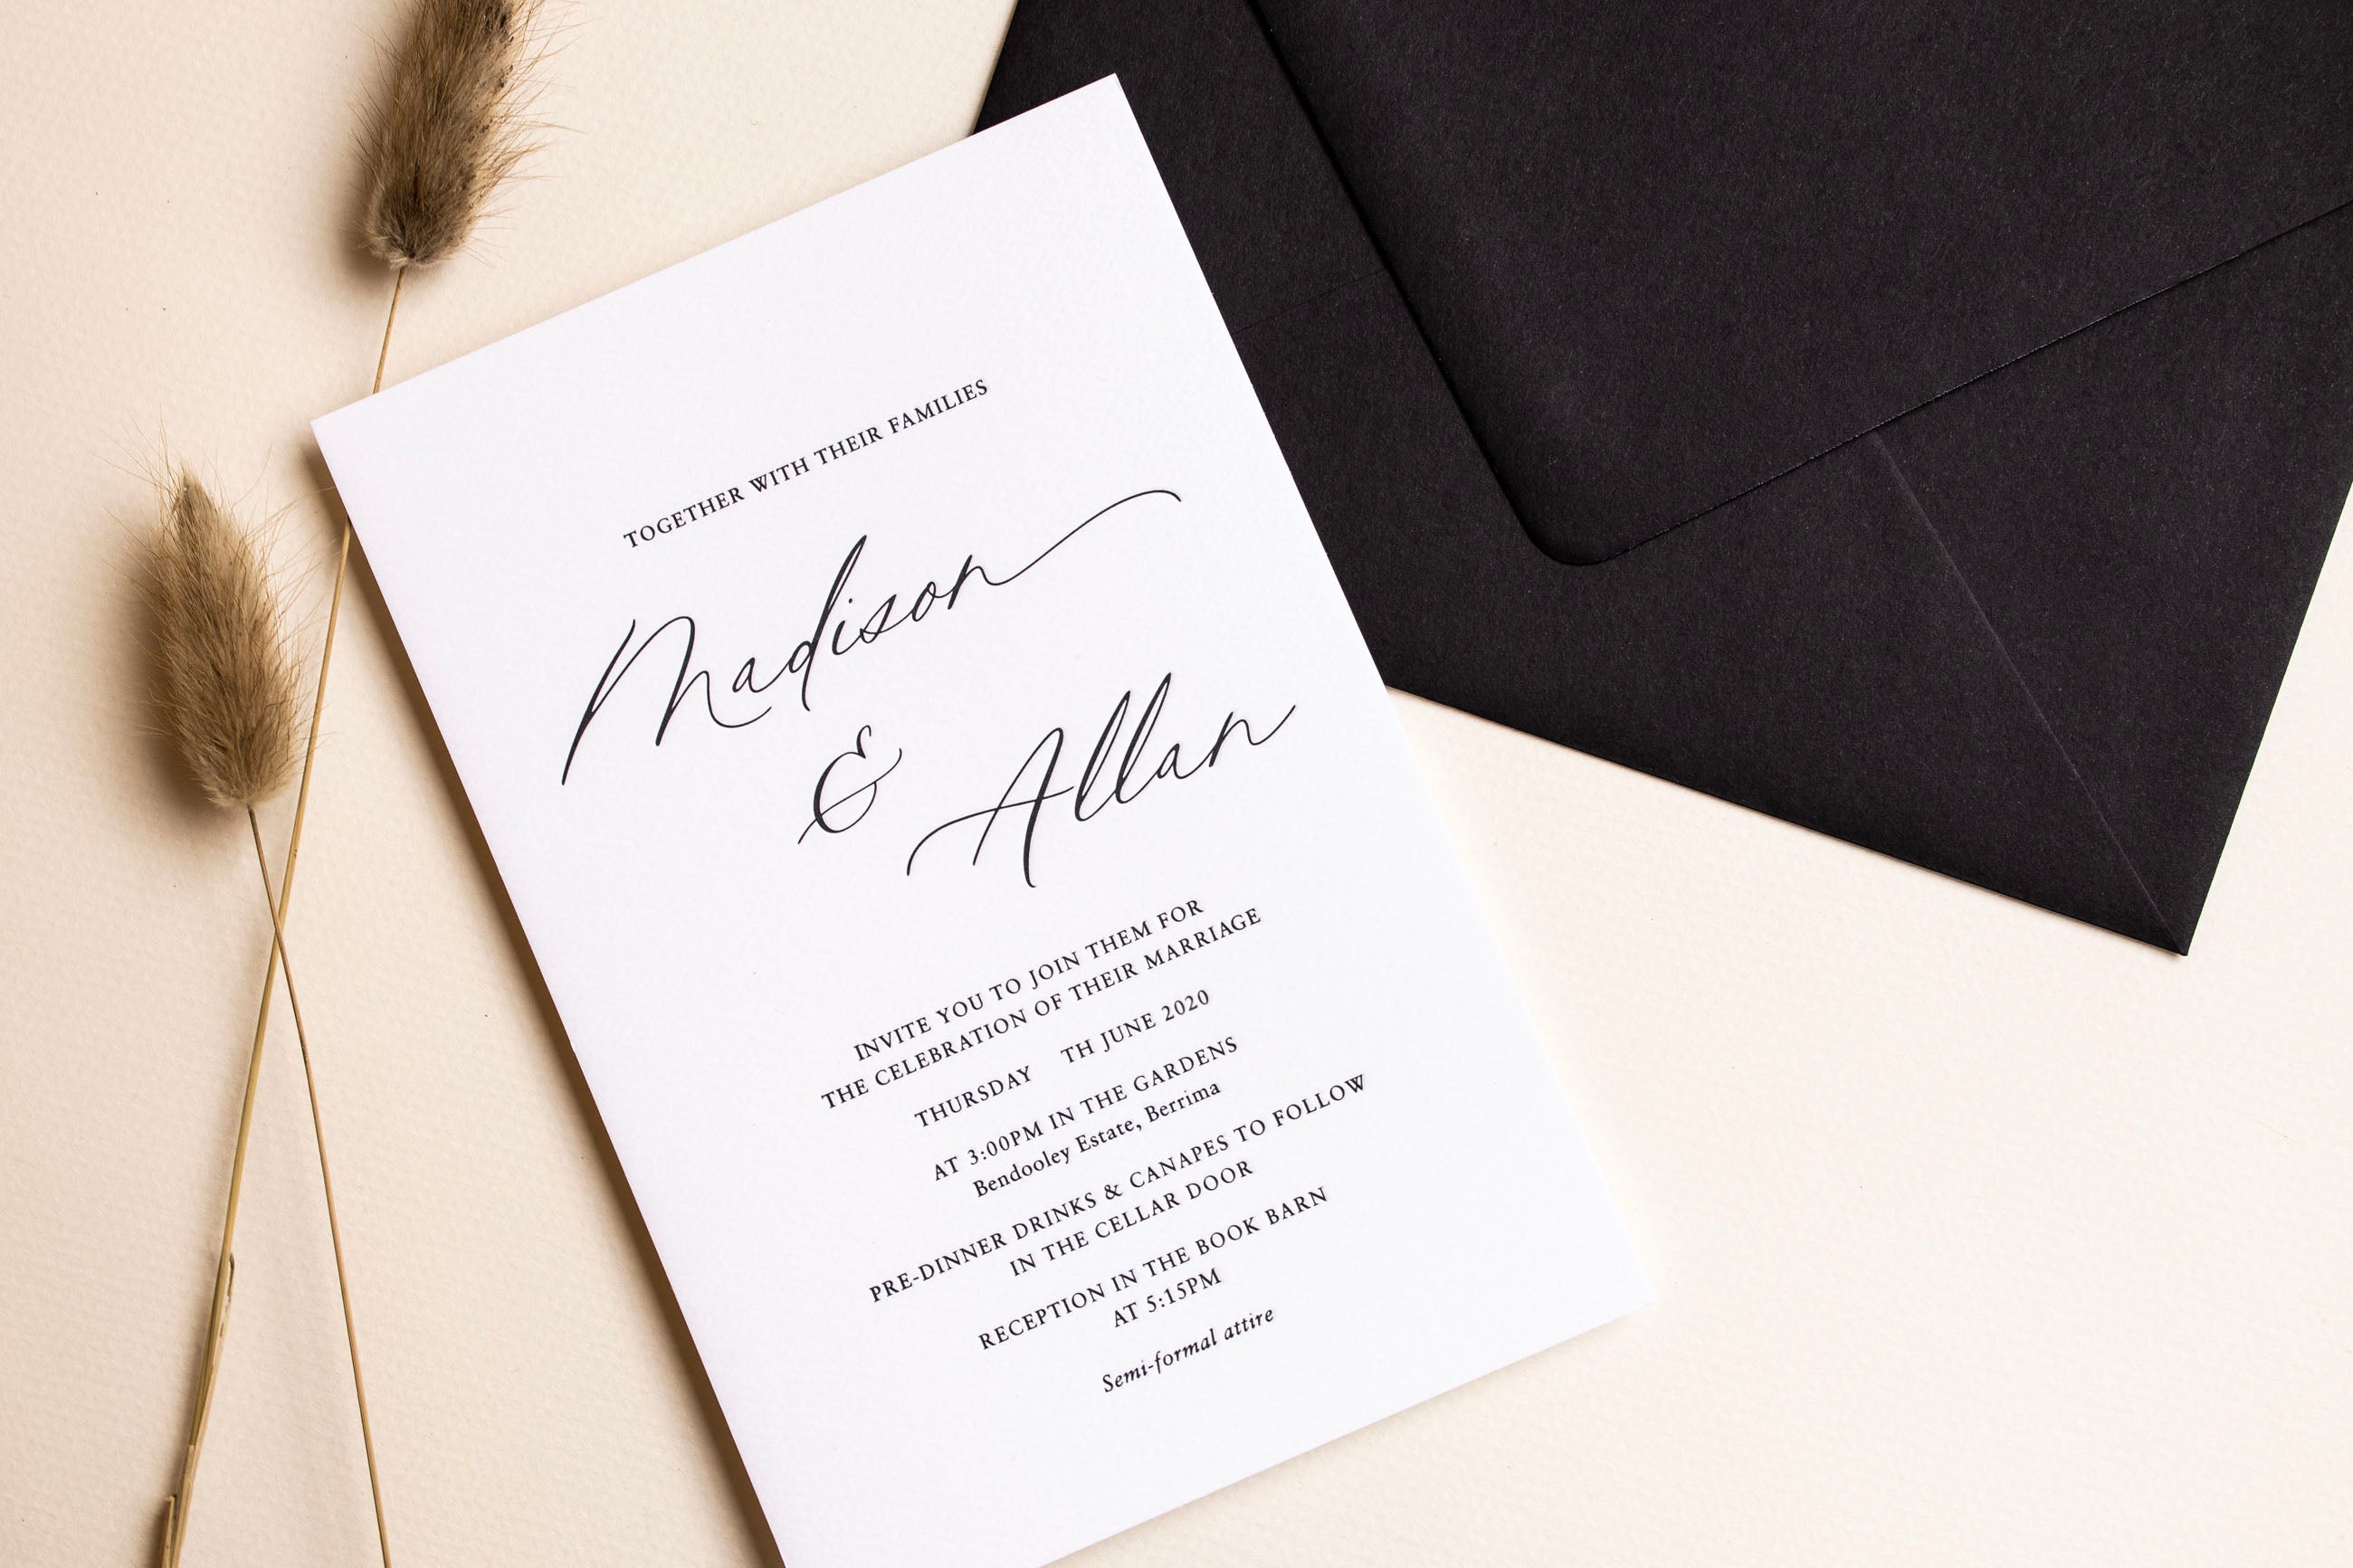 How are letterpress invitations made?